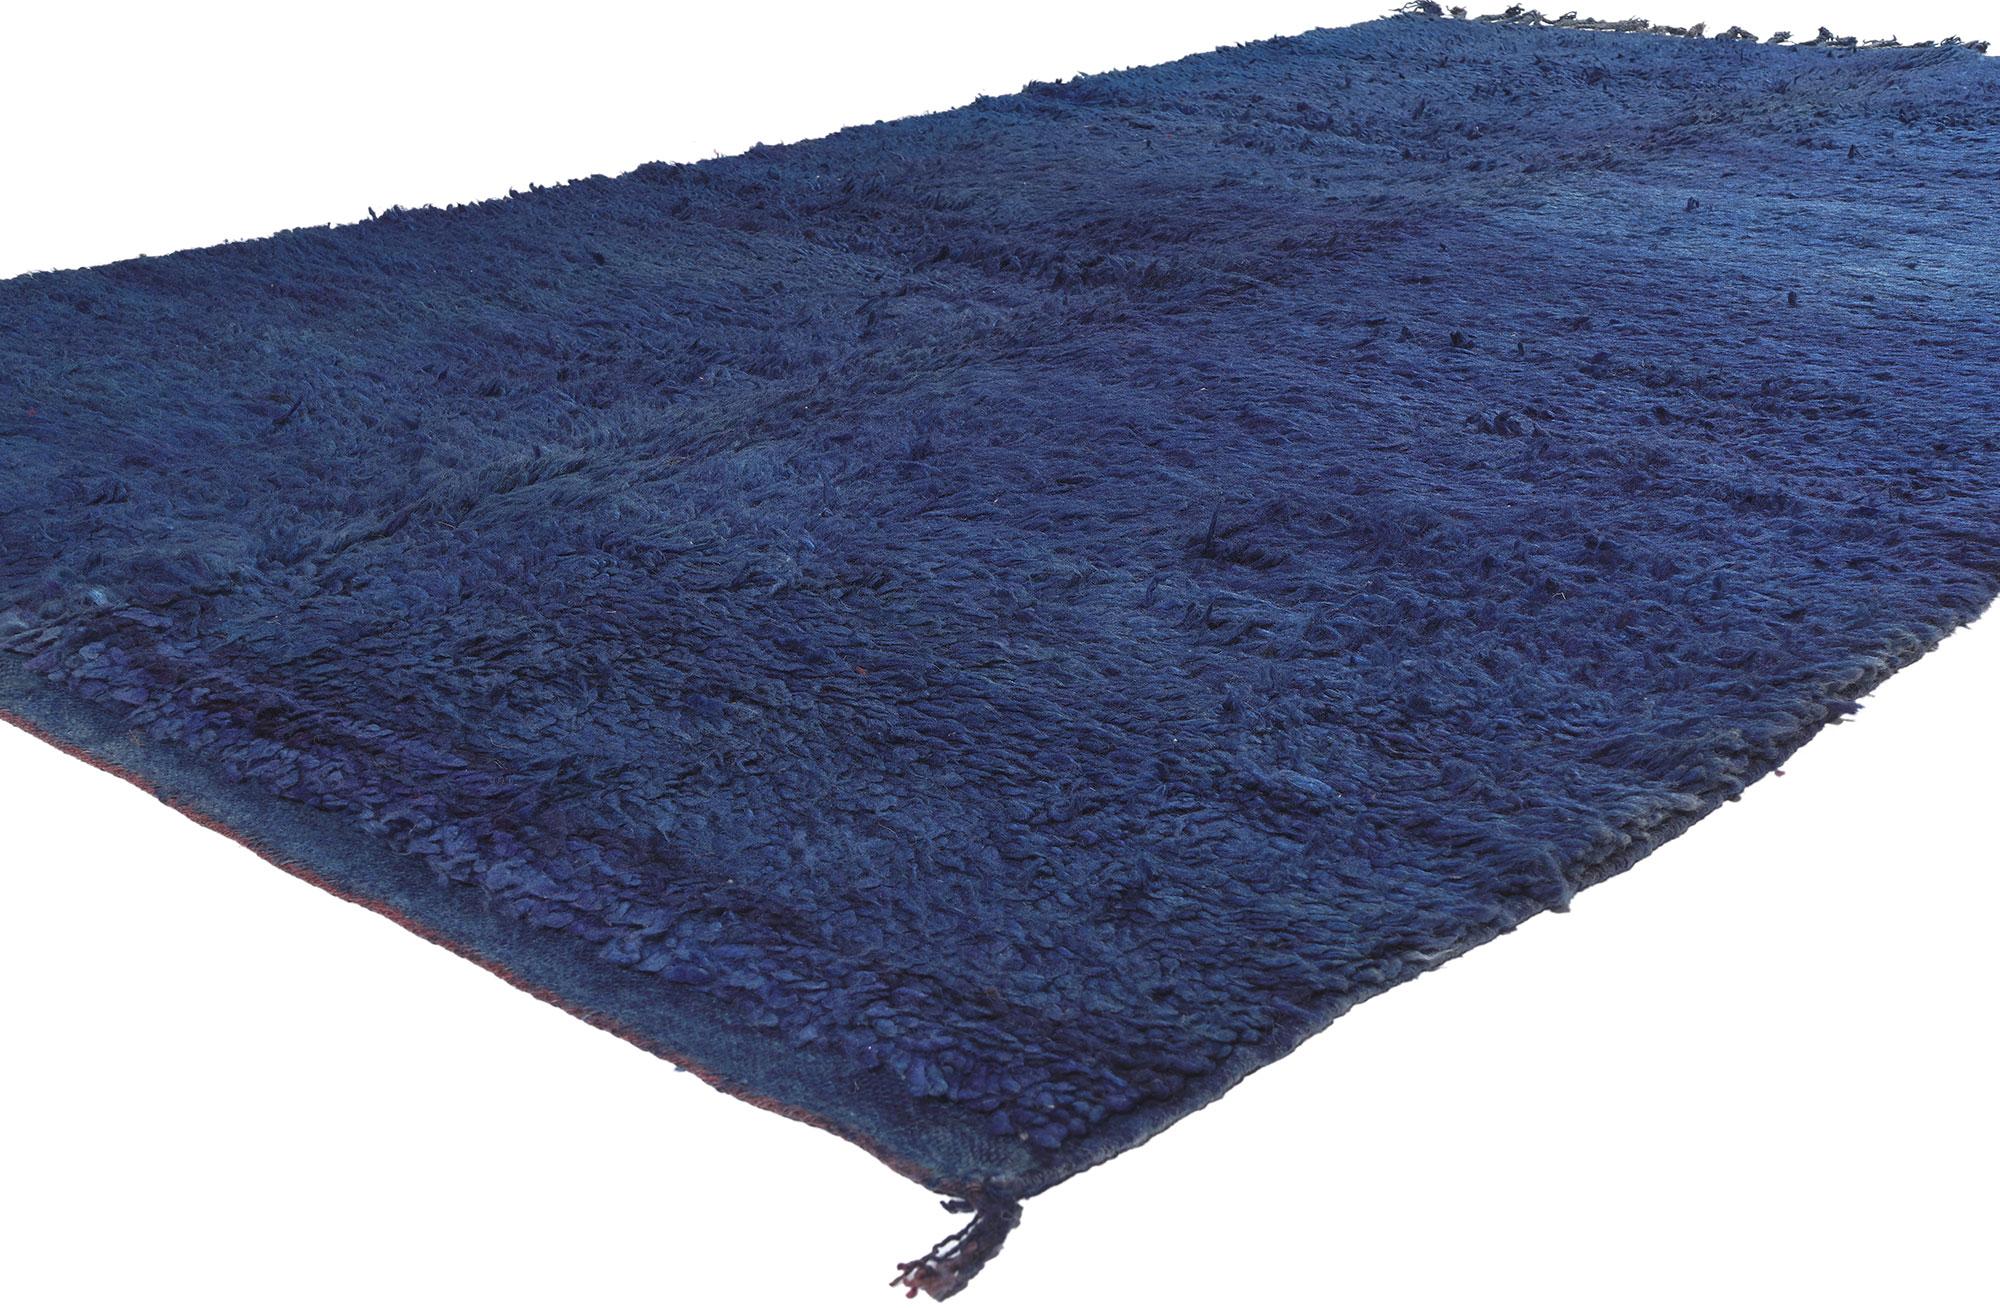 20645 Vintage Blue Beni MGuild Moroccan Rug, 05'10 x 10'04.

In the enchanting realm of Shibui aesthetics, discover the allure of this hand-knotted wool vintage Beni Mguild Moroccan rug—a masterpiece from the western central Middle Atlas,